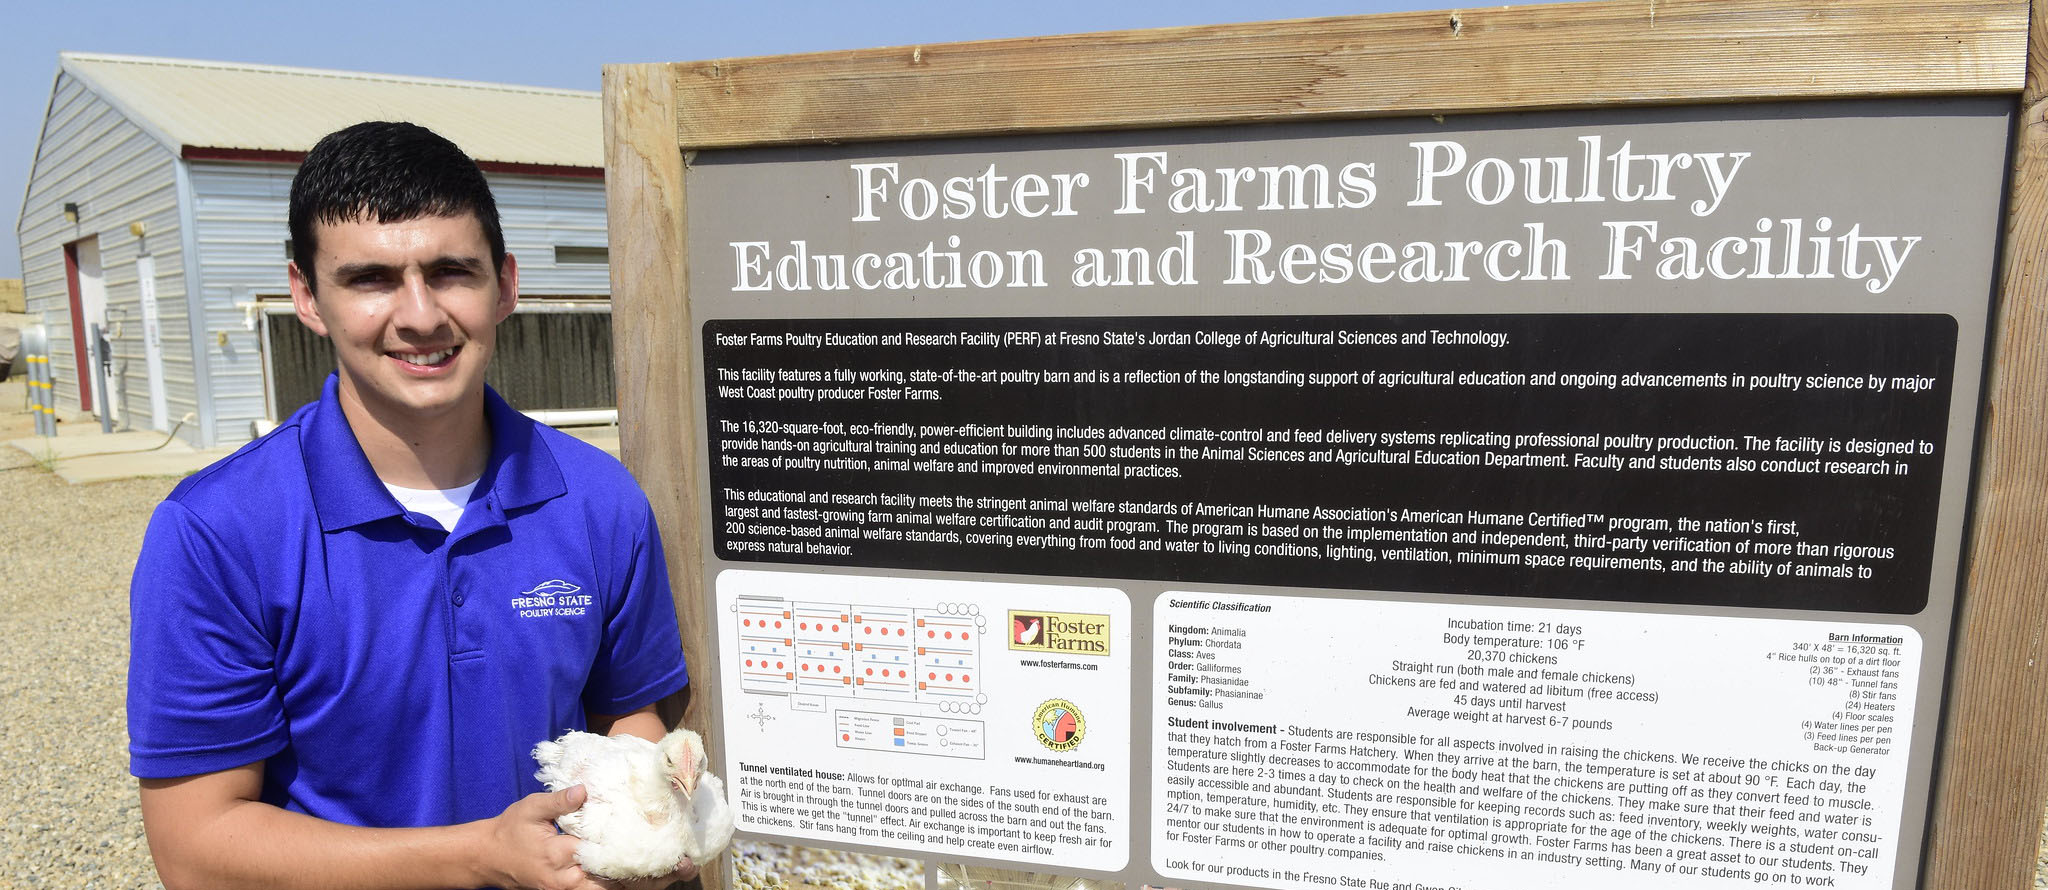 Rodrigo Lopez holding chicken in front of Foster Farms Education and Research Facility sign